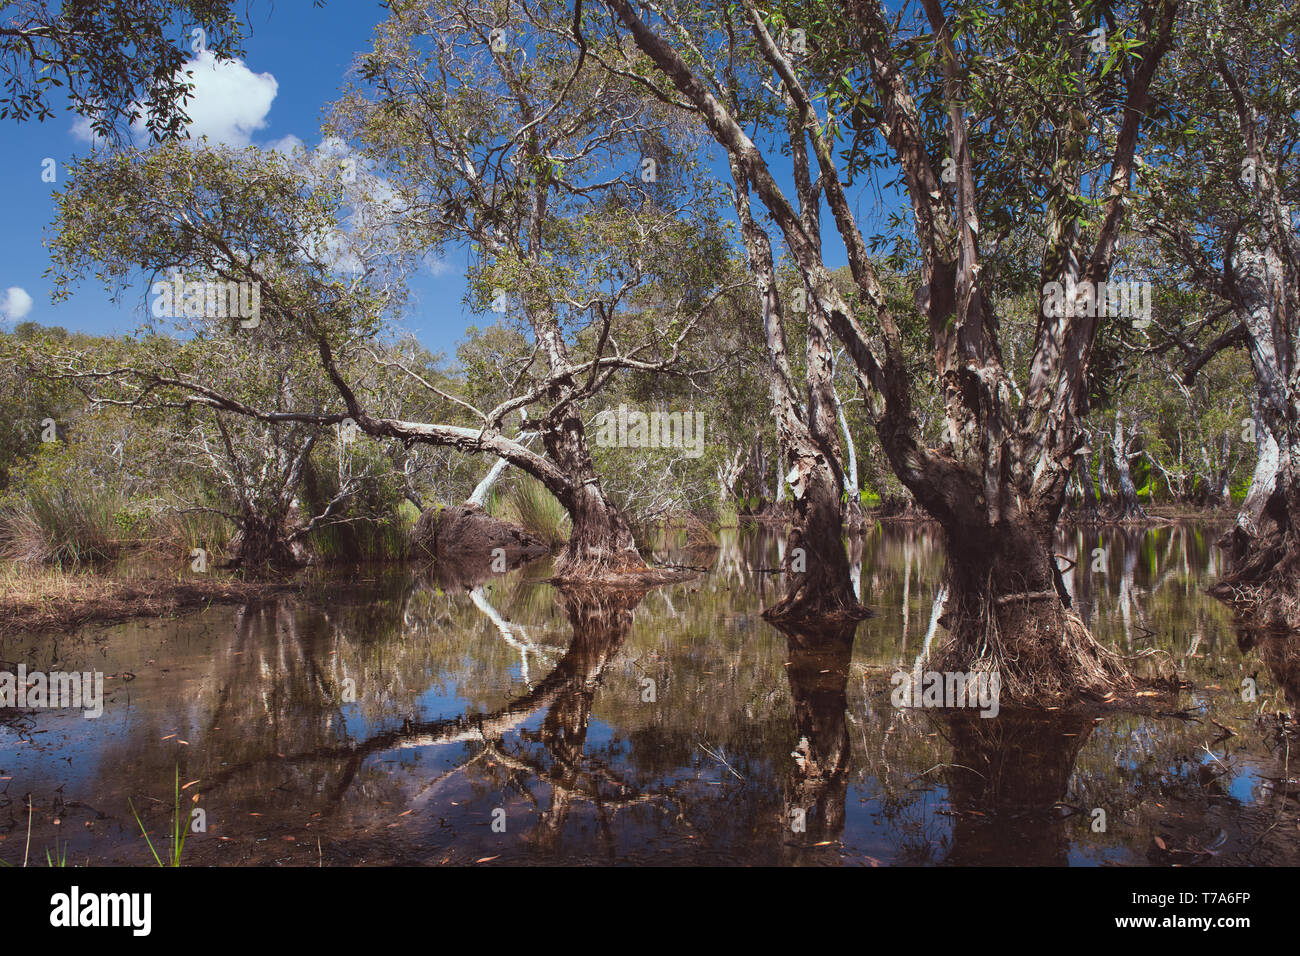 Environment of botanical garden wetland trees and water with sun lighting and blue sky. Stock Photo